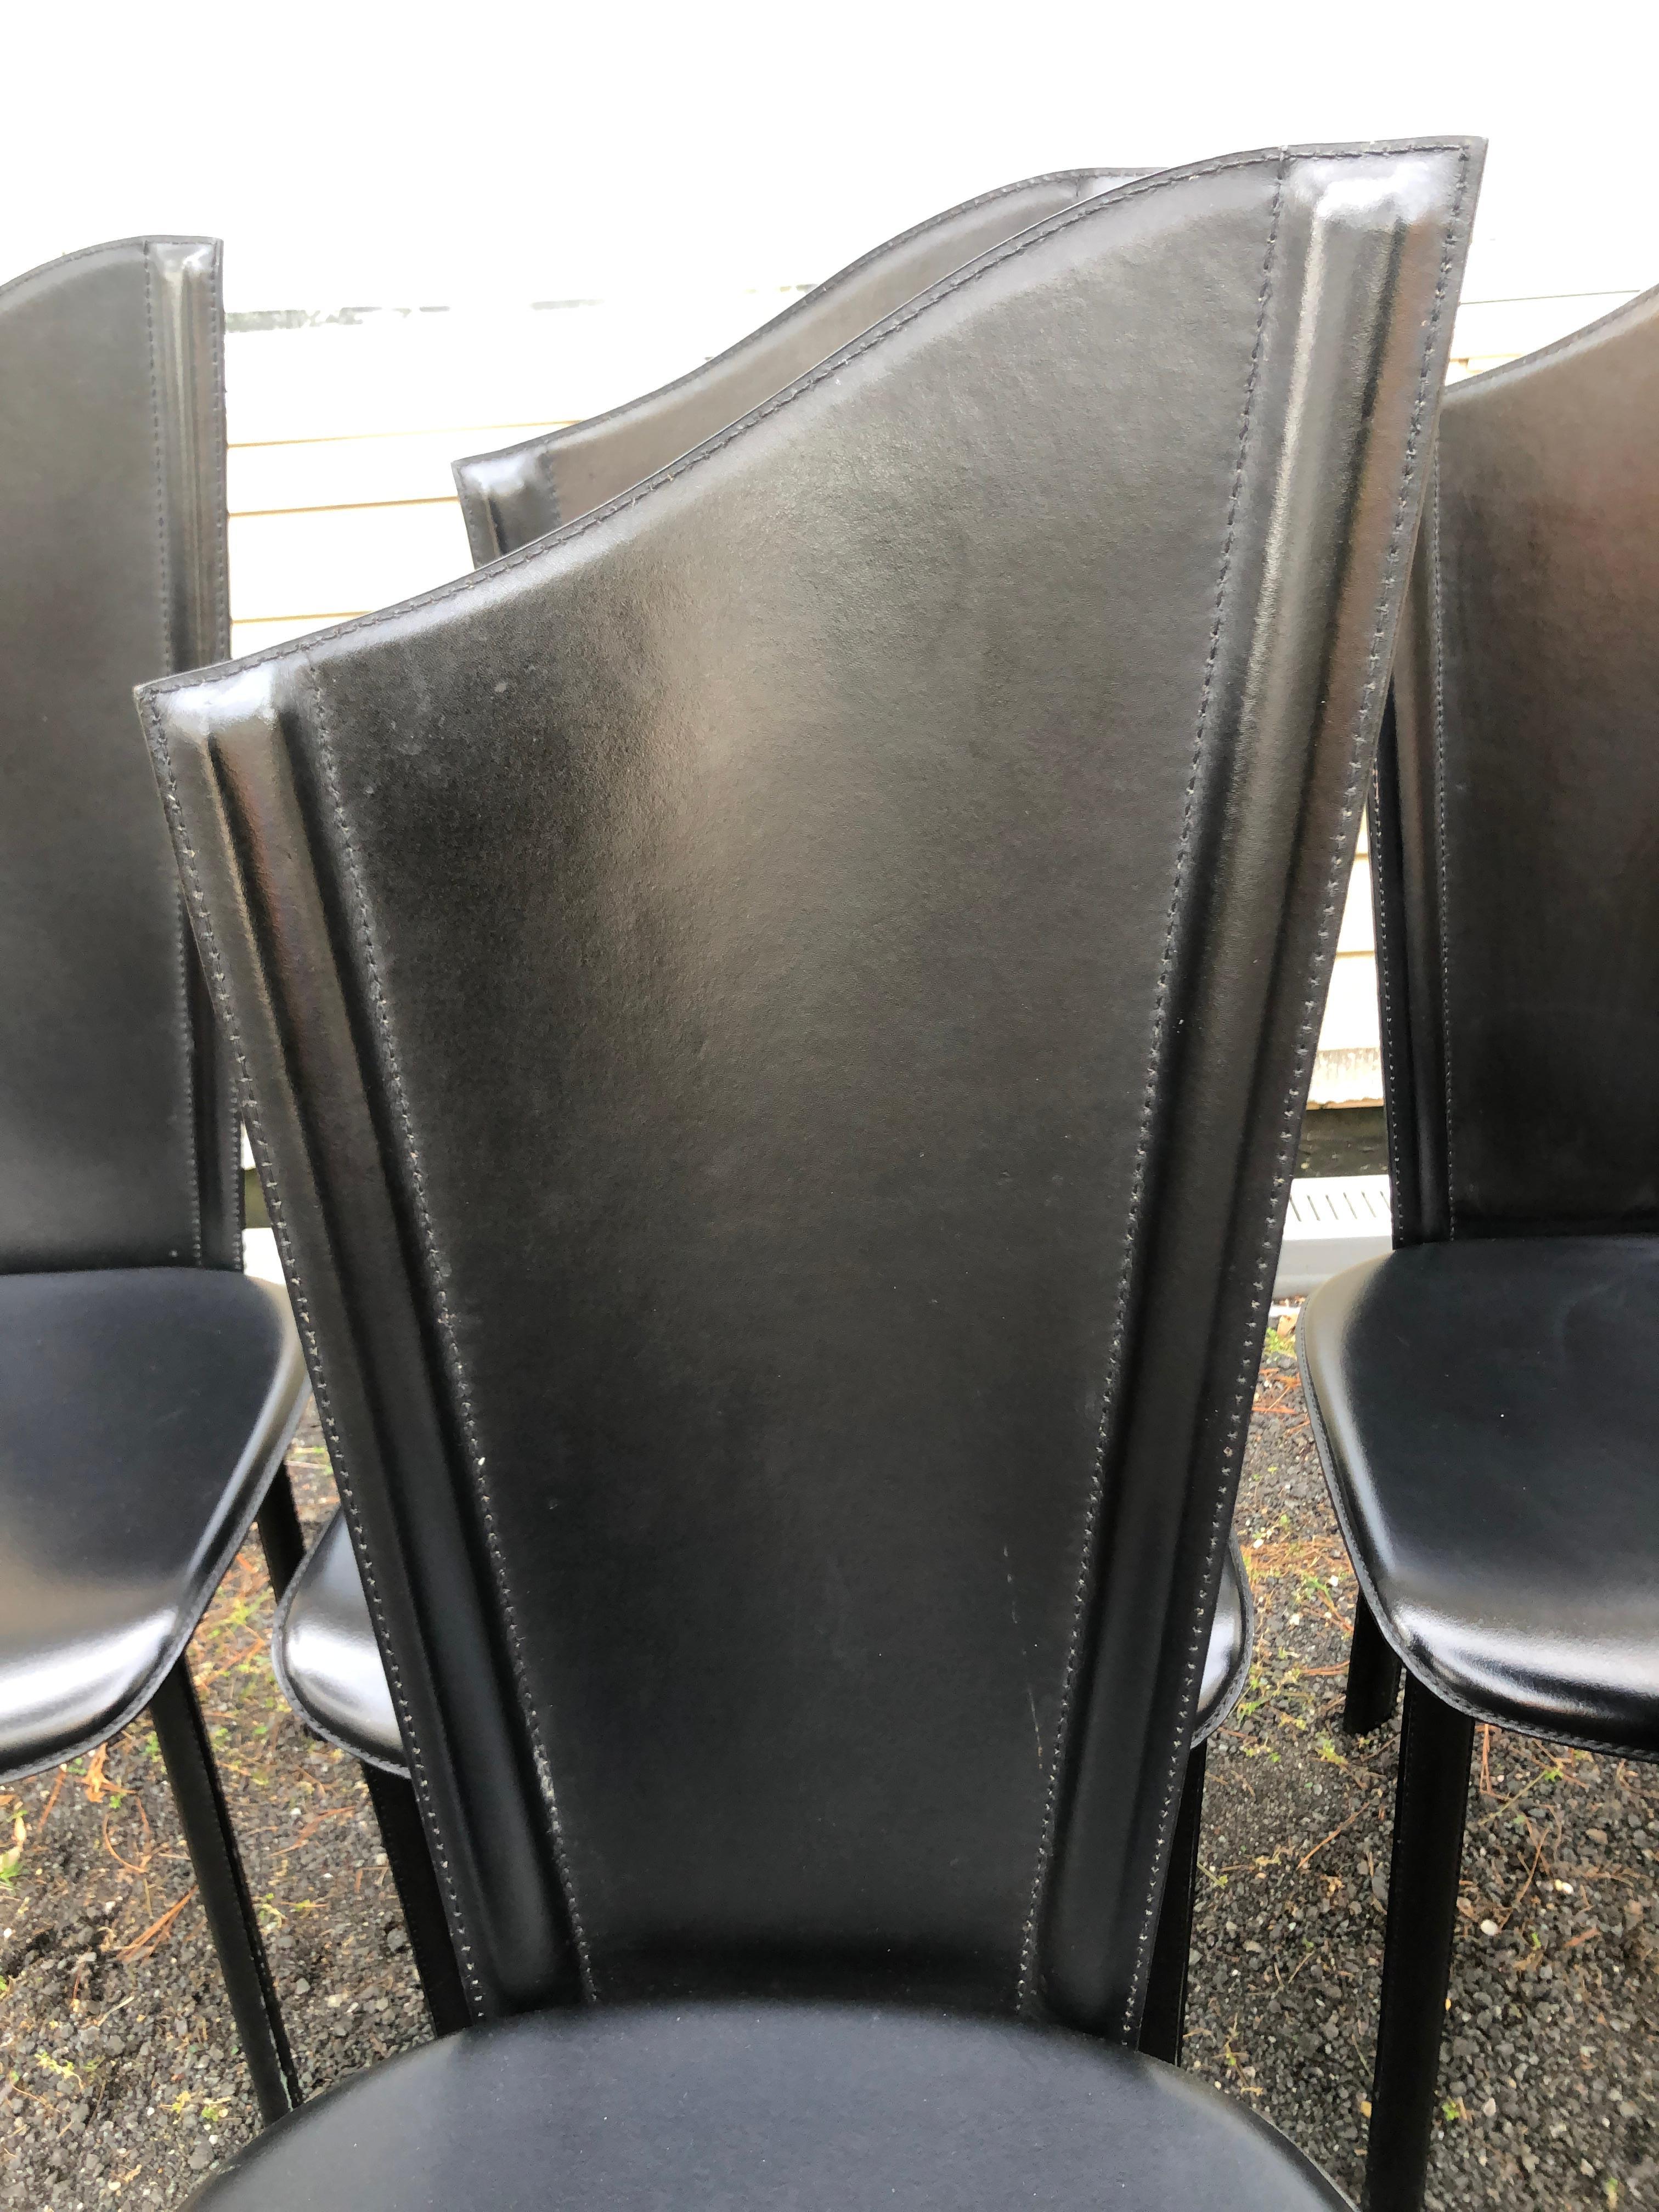 Stylish Set of 8 Italian Black Leather Dining Chair Tall Asymmetric Back   In Good Condition For Sale In Pemberton, NJ